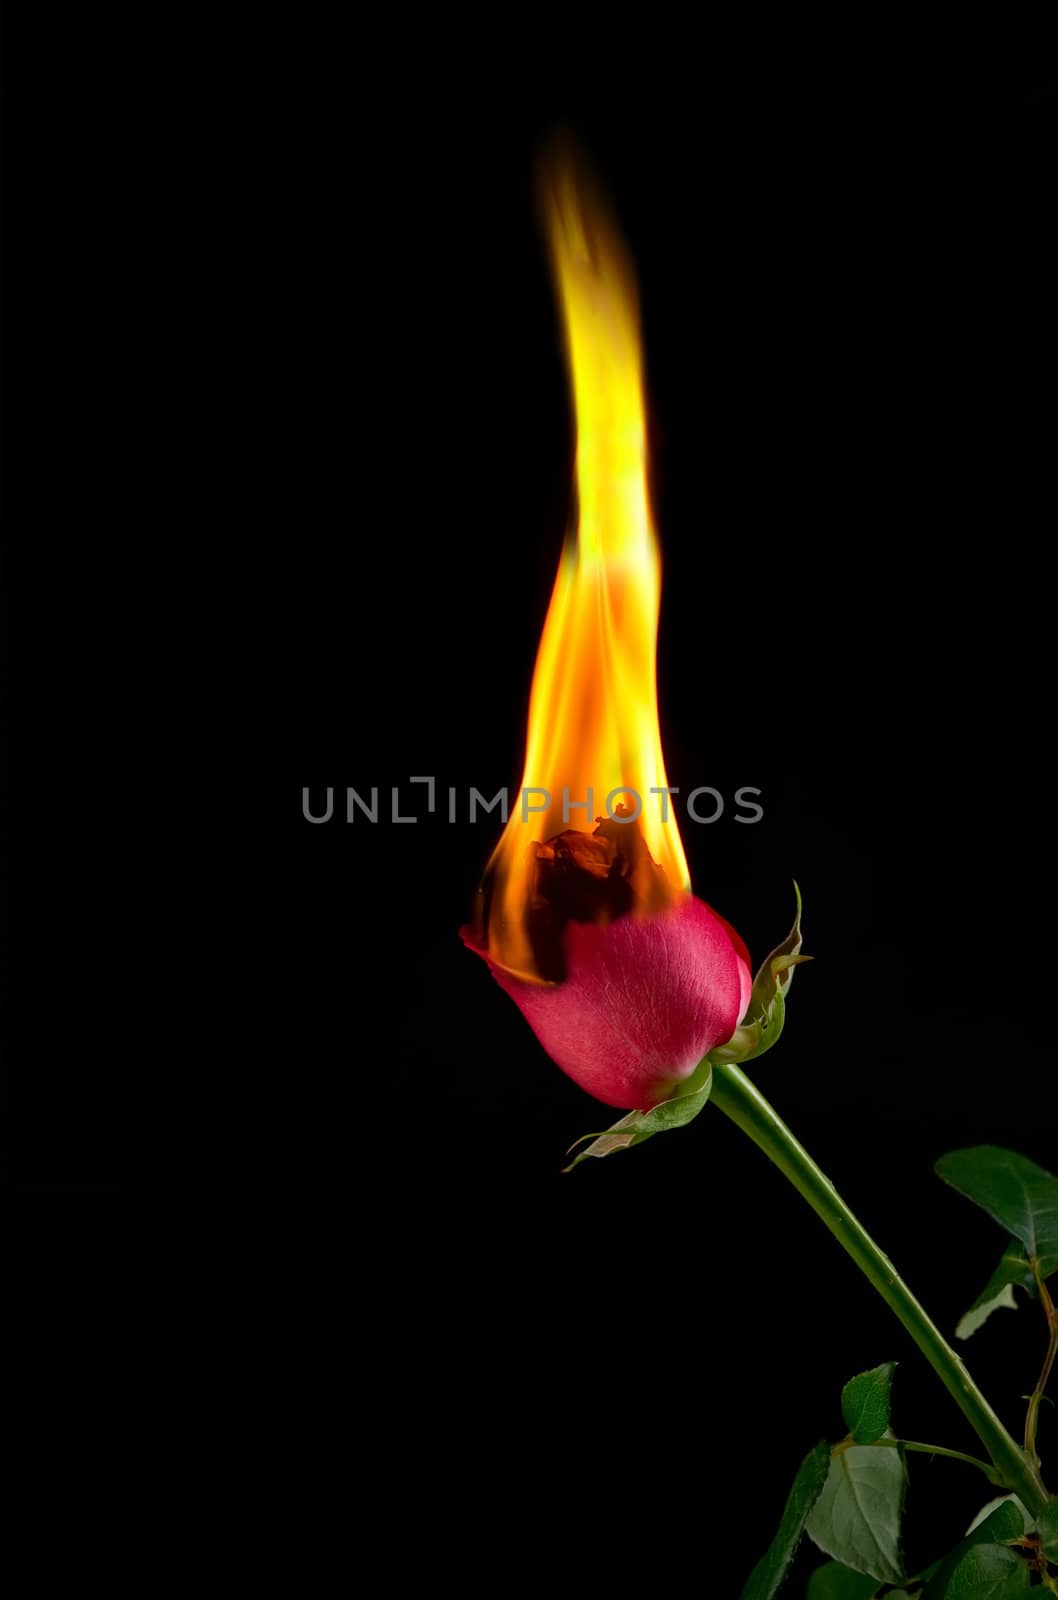 Image of a red rose burning and in flames